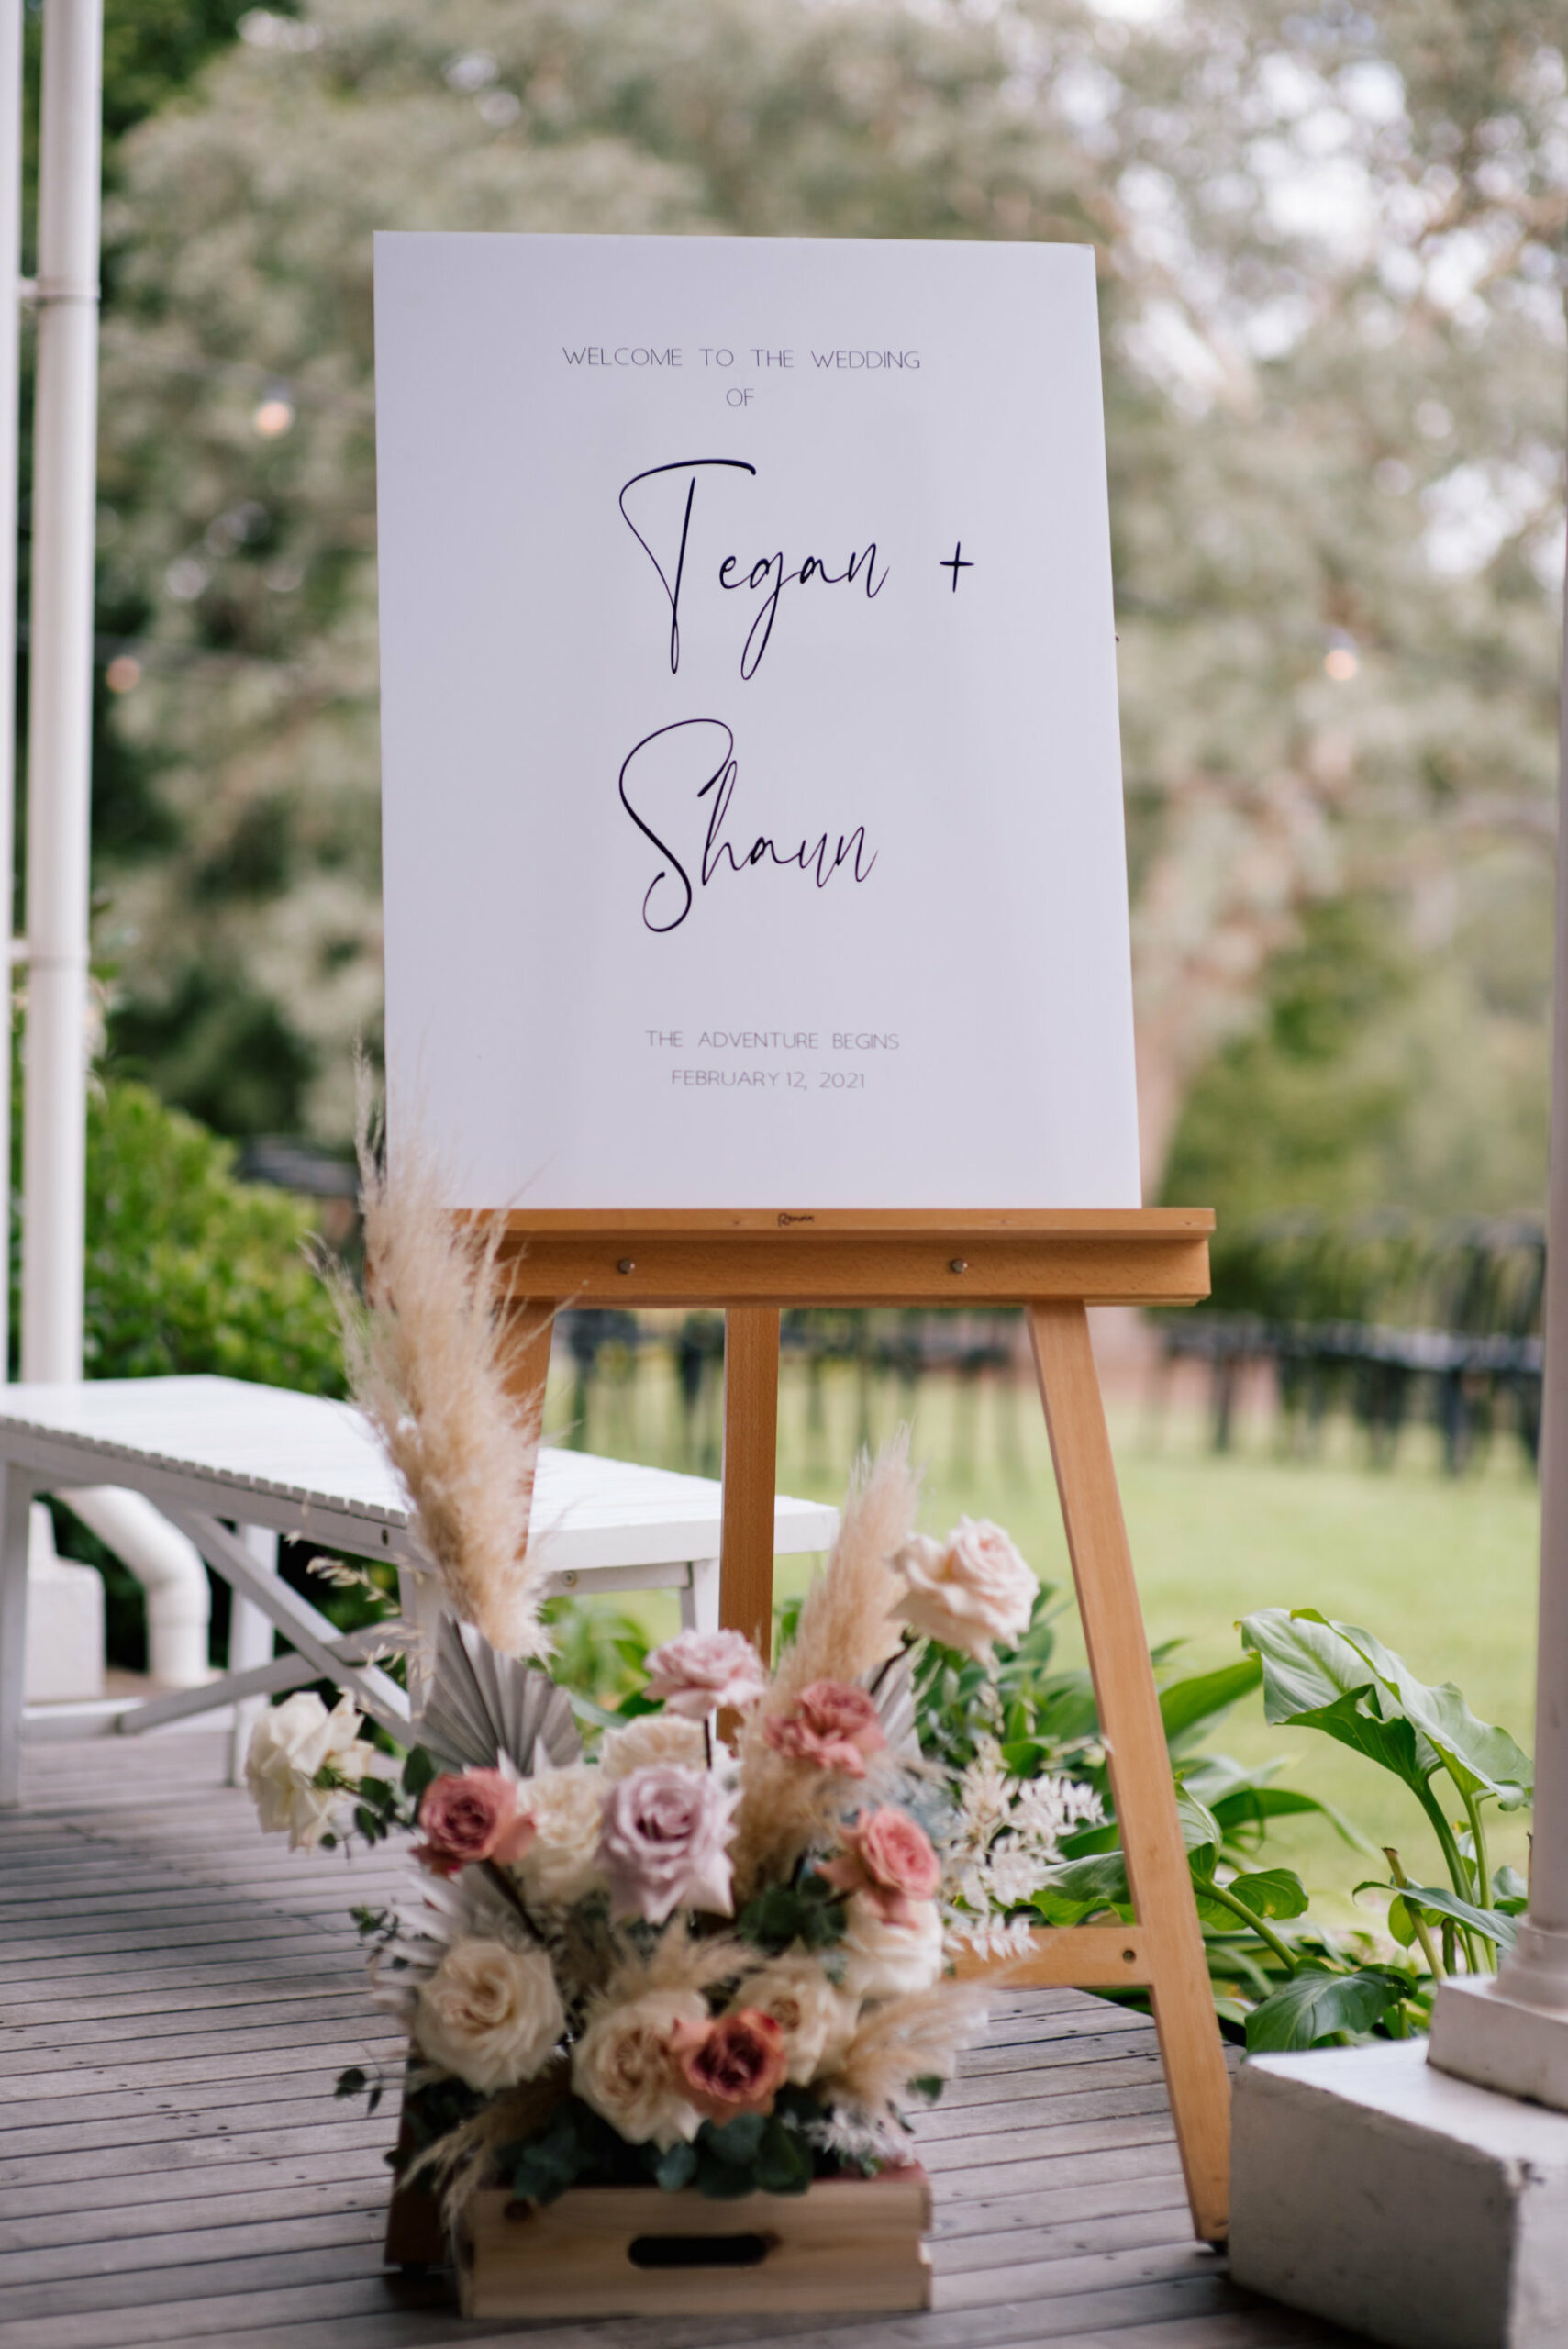 Romantic wedding at The Farm Yarra Valley, Warrandyte South. Photographed by Love & Other Photography.